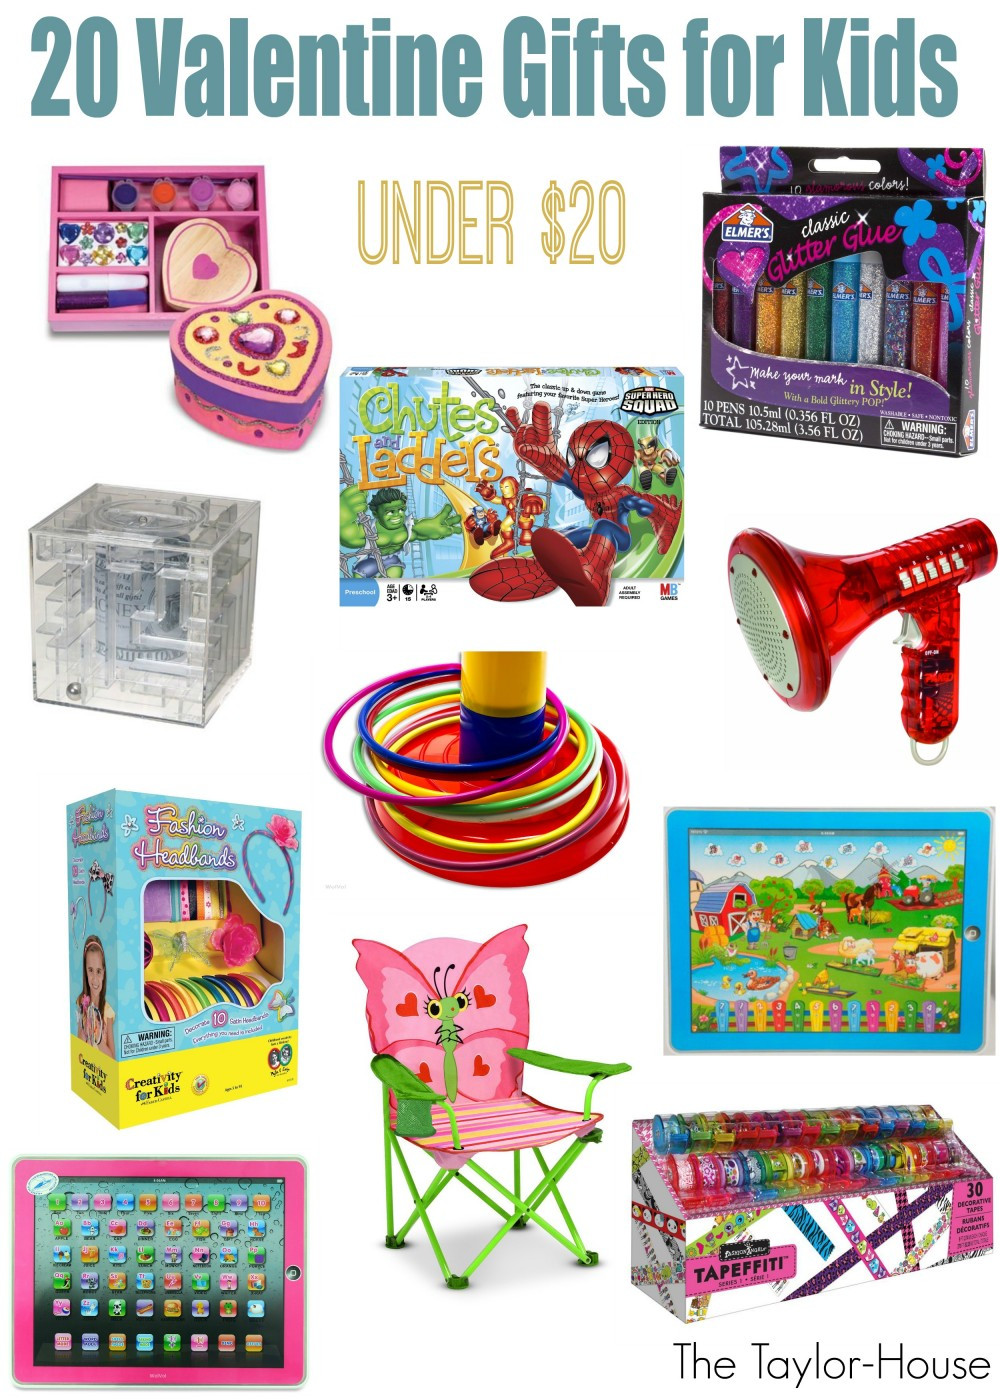 Good Birthday Gifts For Kids
 Valentine Gift Ideas for Kids